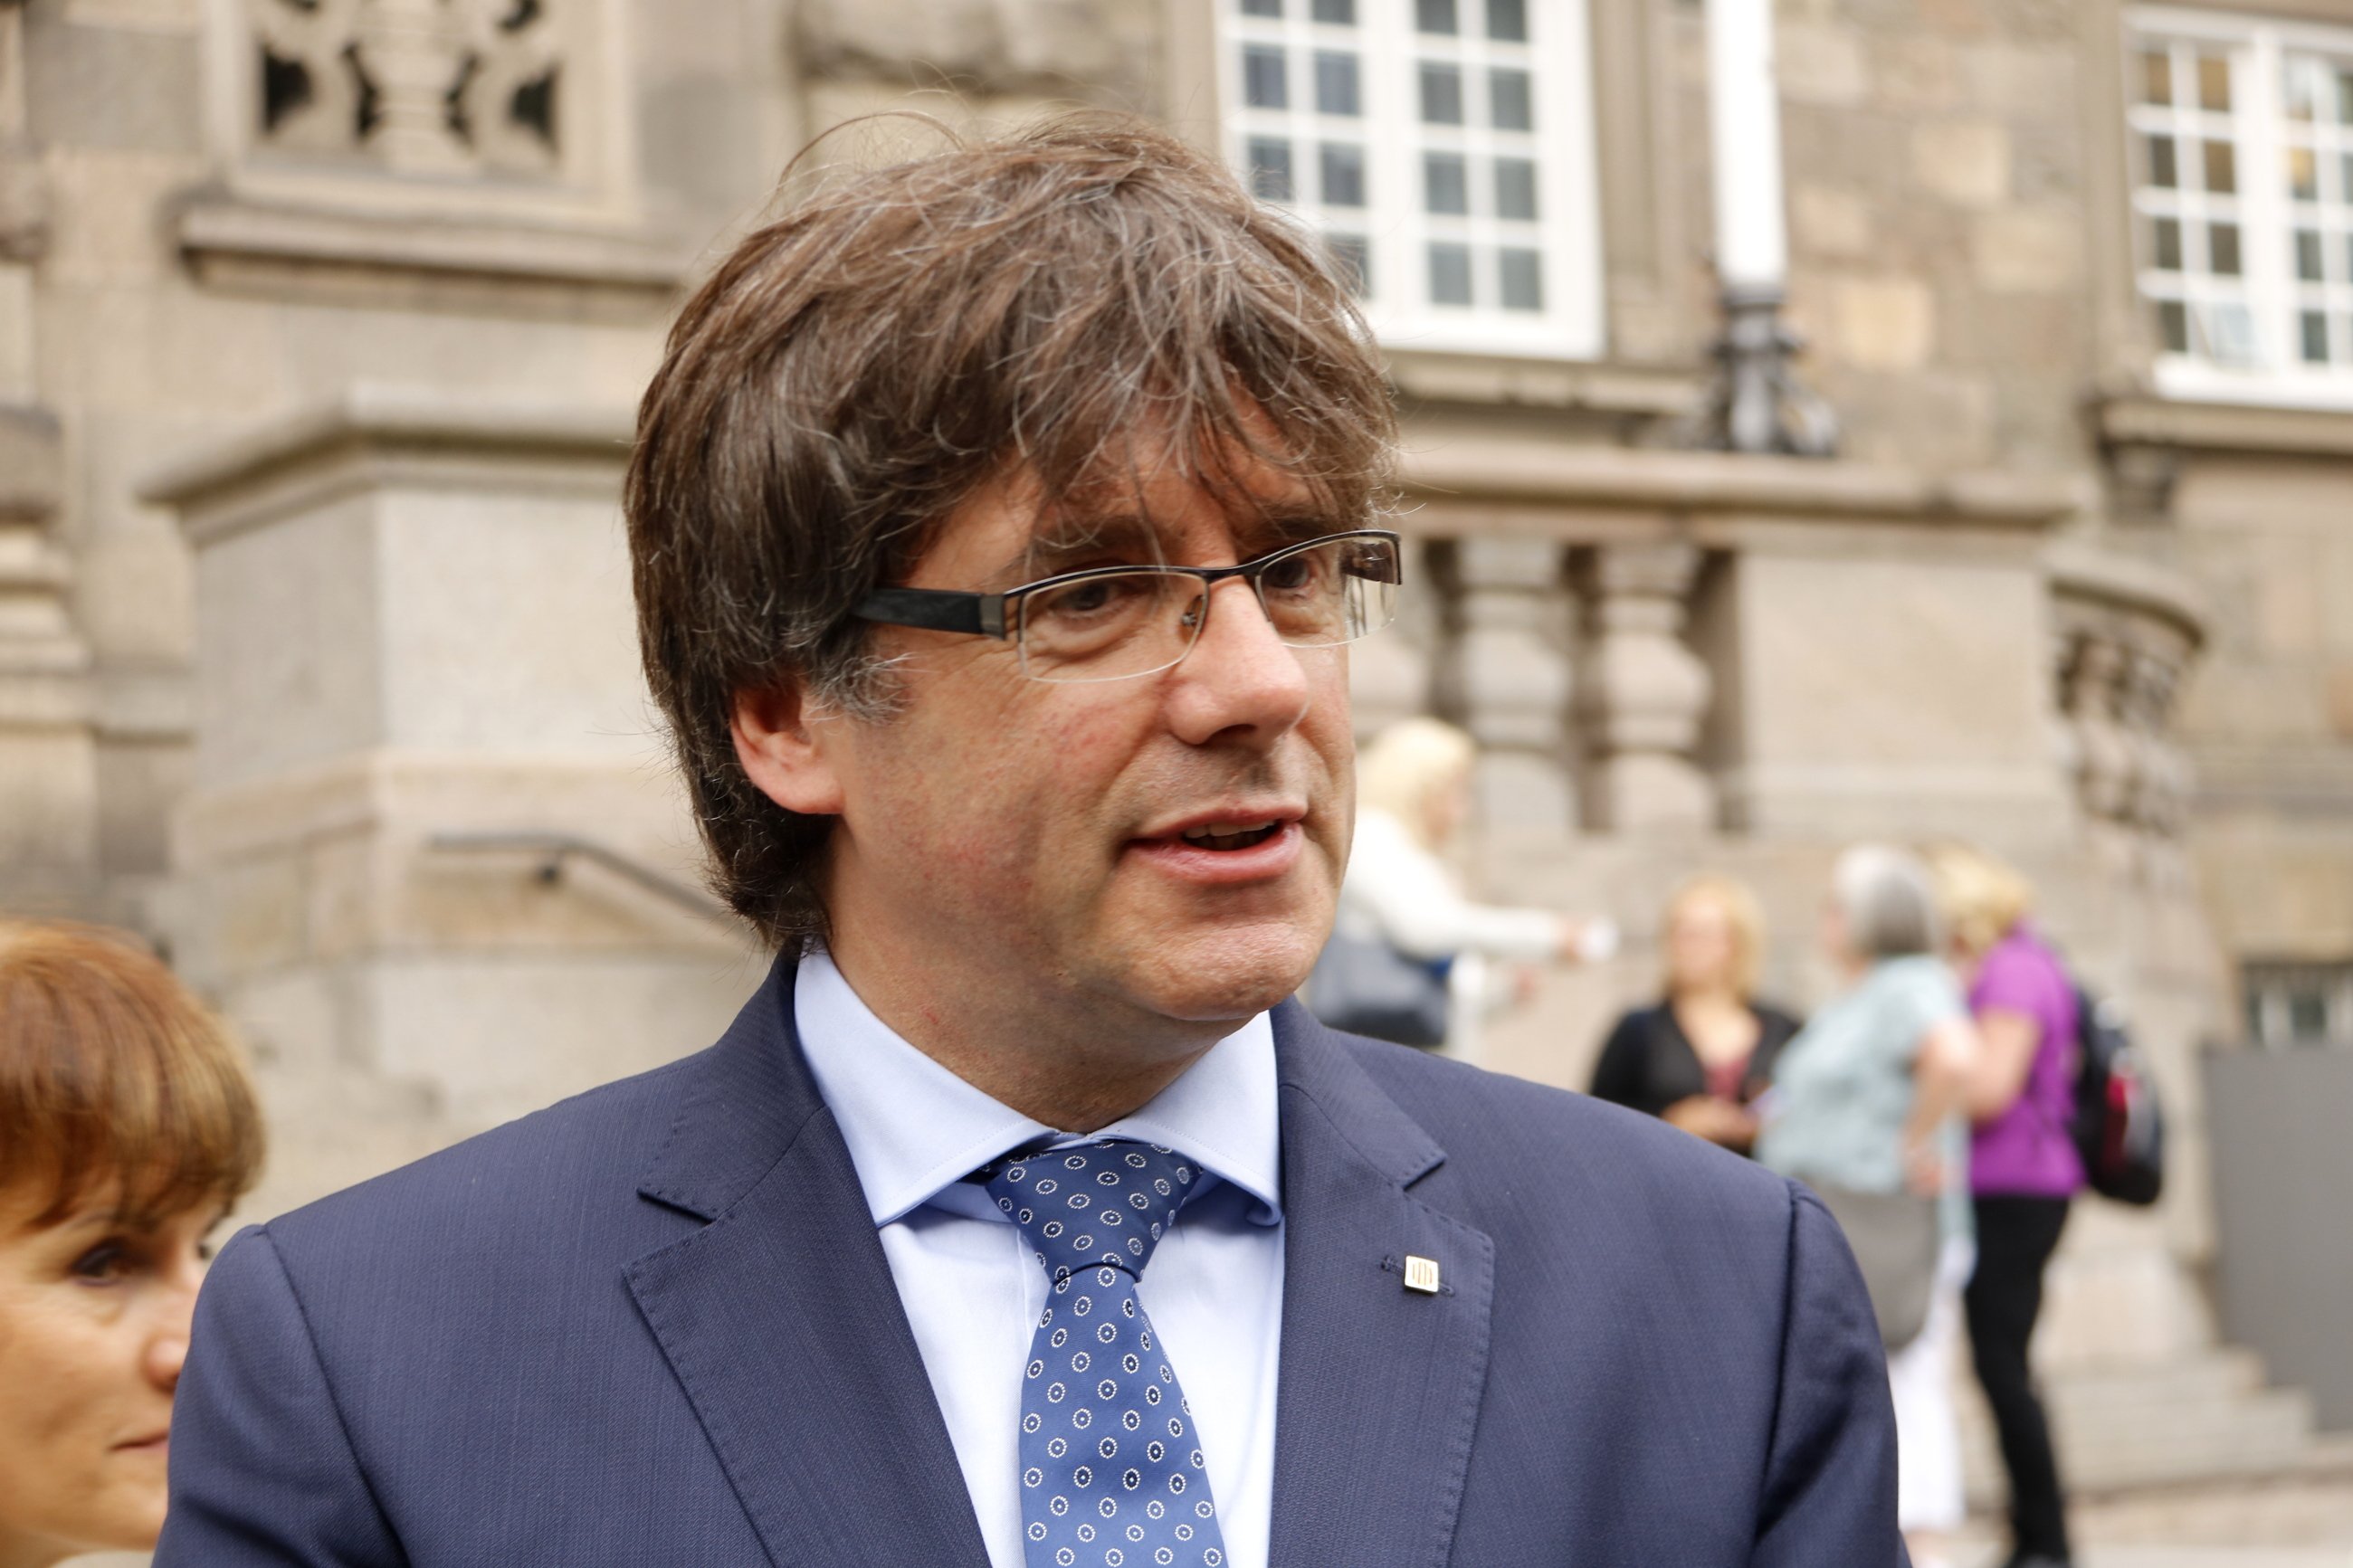 Irritation at Spanish embassy in Denmark due to Puigdemont's visit